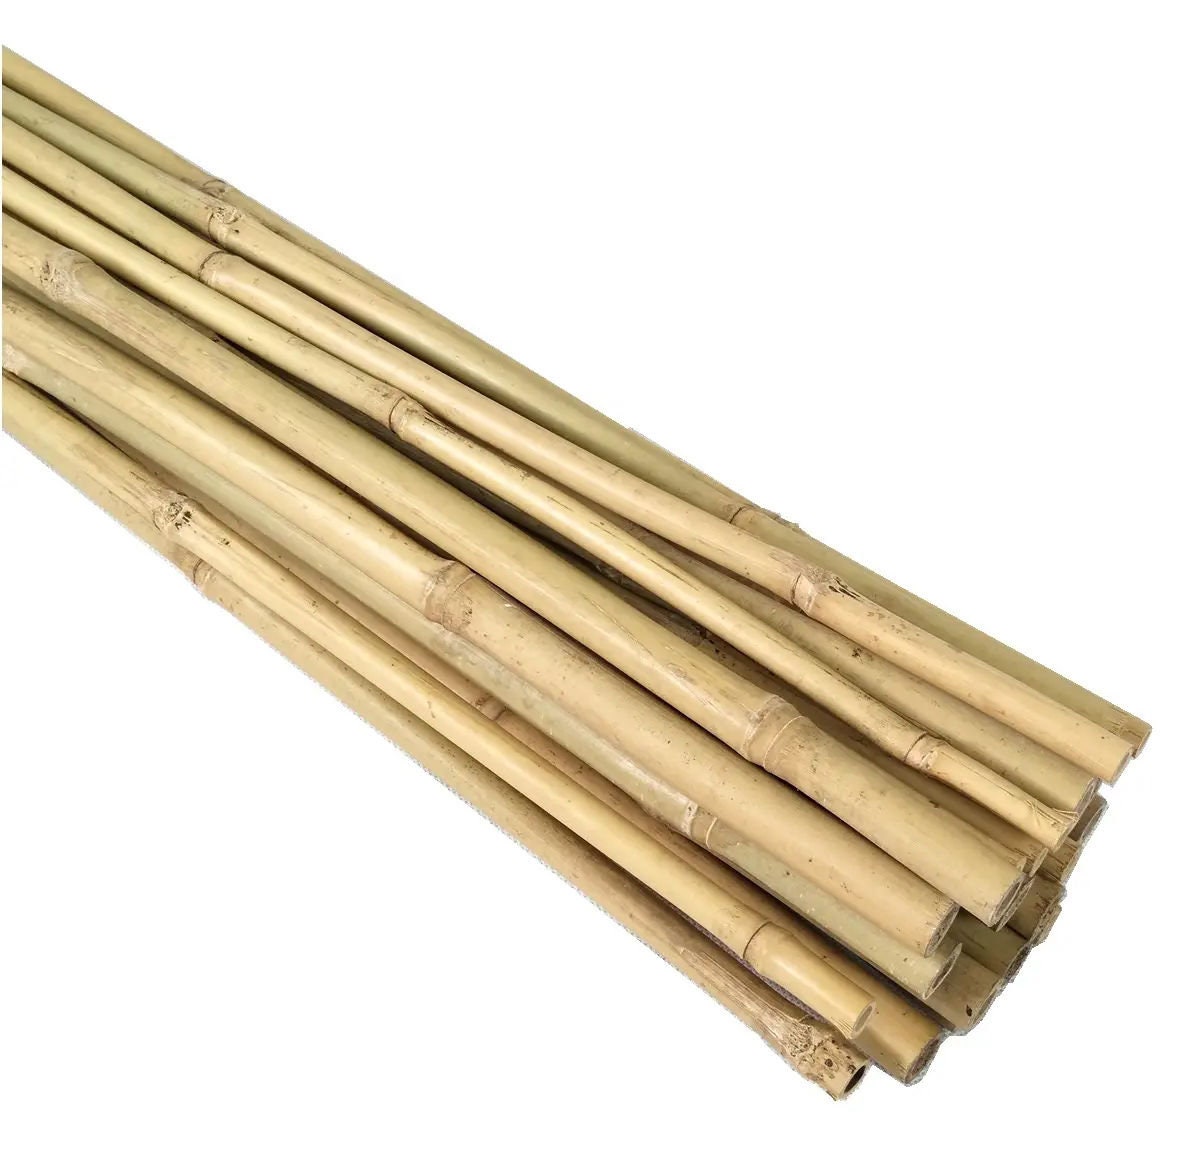 60 Pieces Bamboo Sticks Wooden Craft Sticks Extra Long Sticks for Crafting  (15.7 Inches Length )